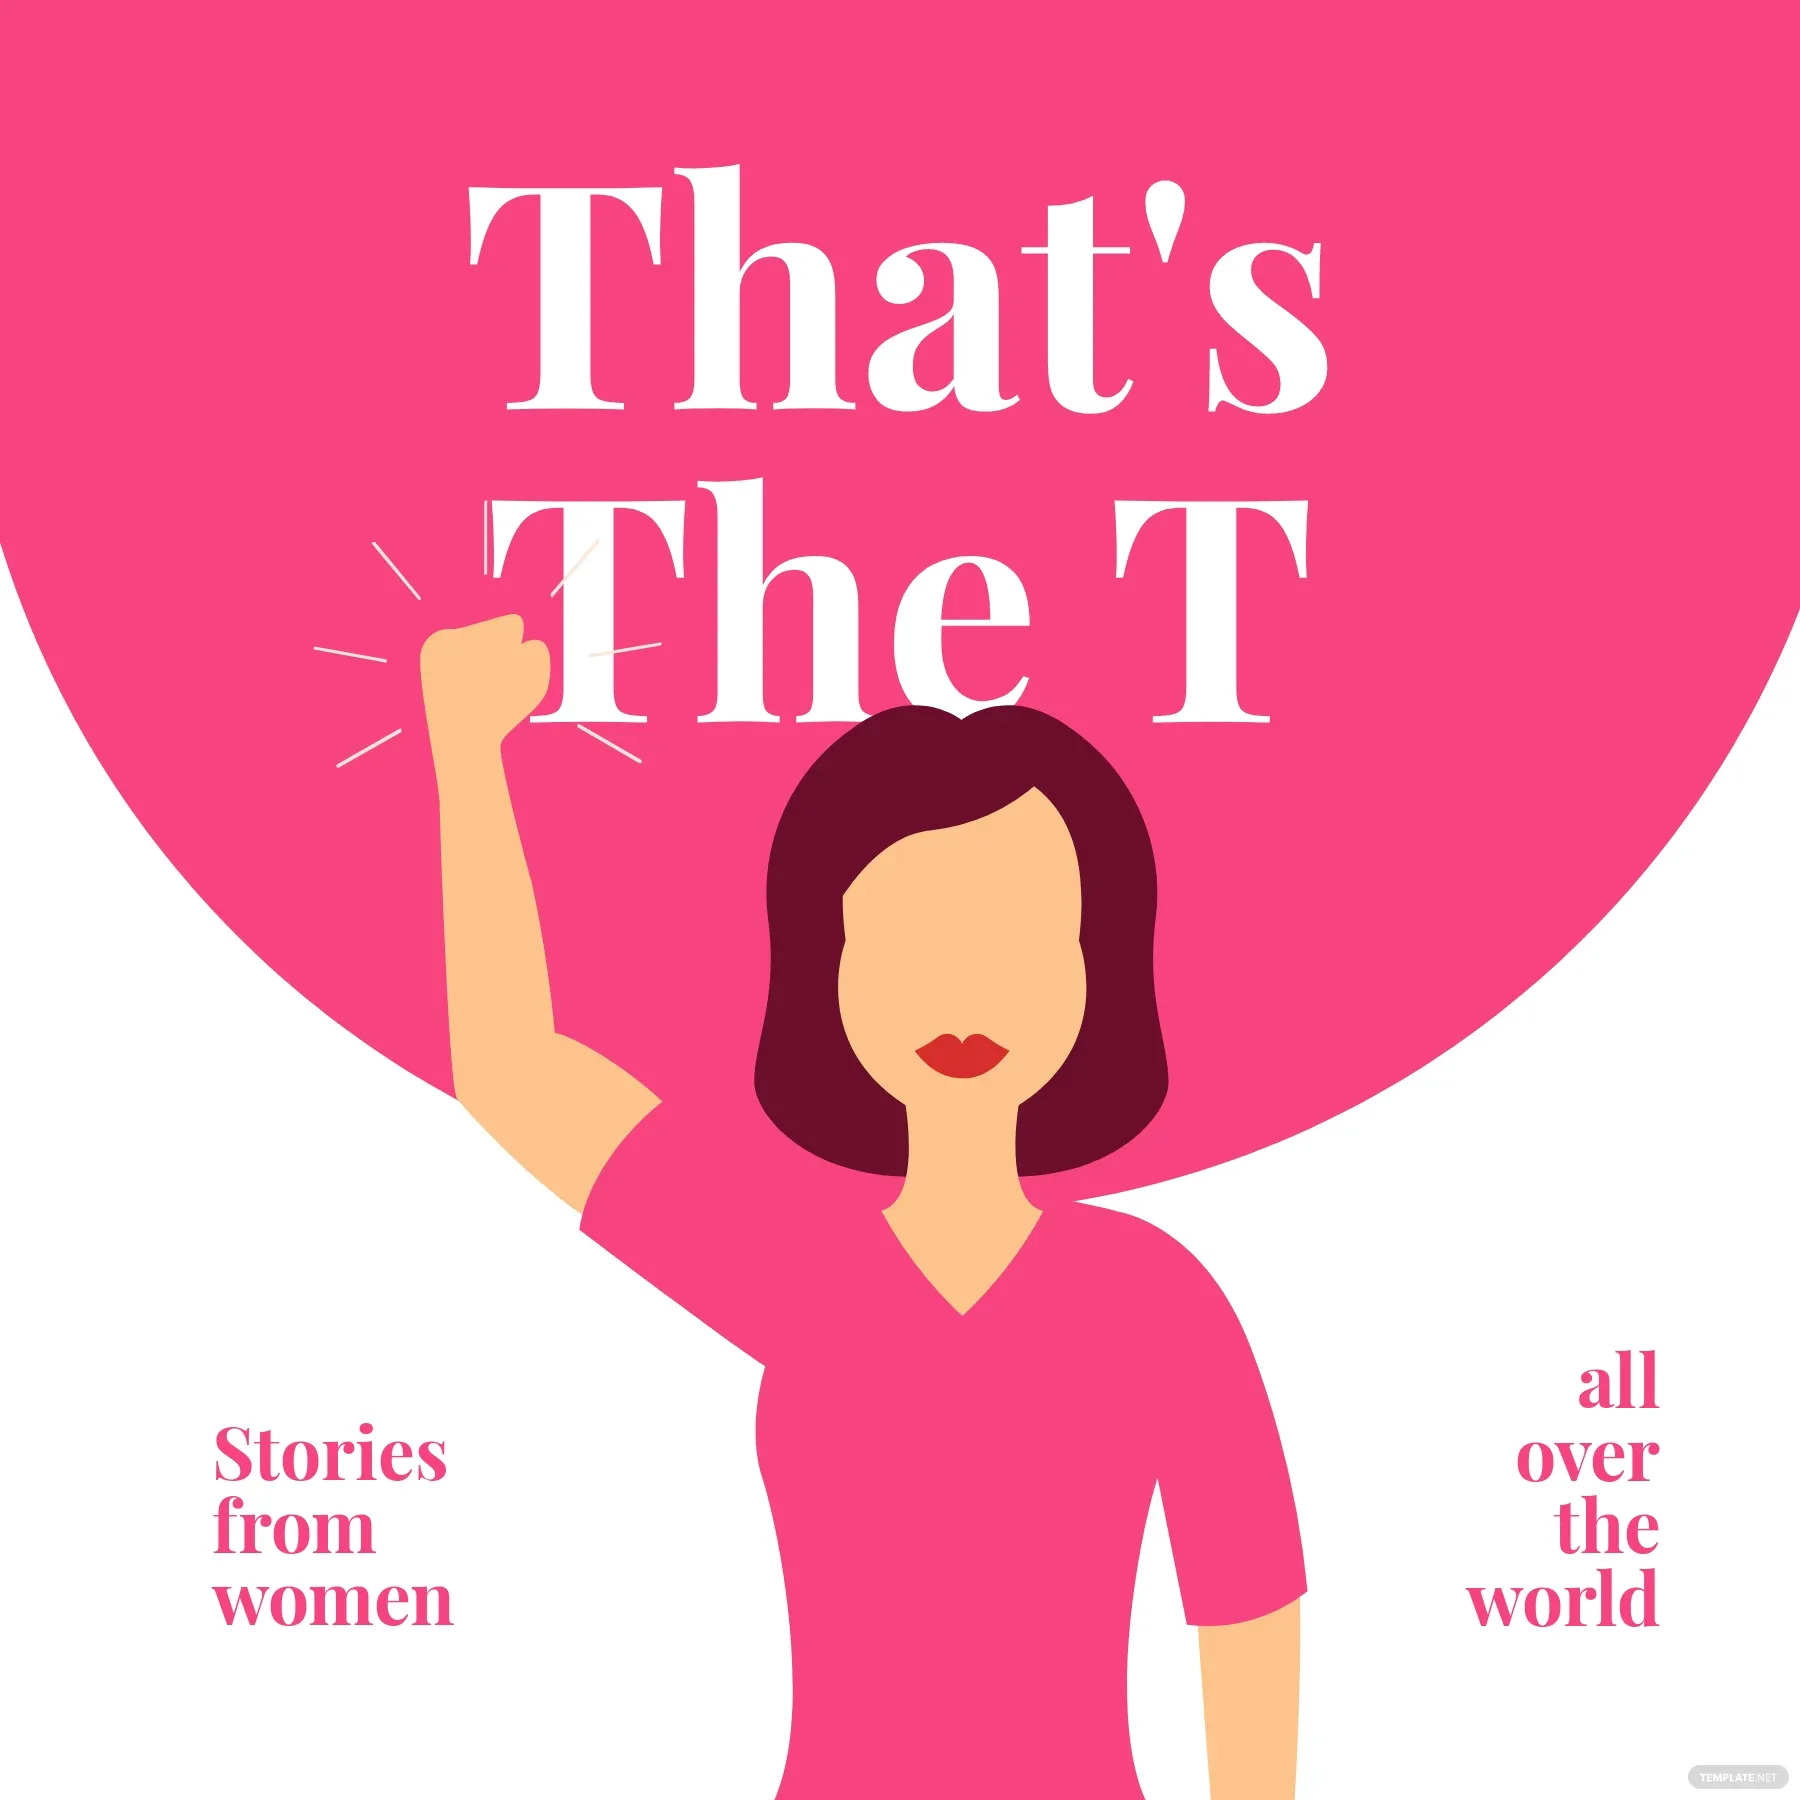 women stories podcast cover ideas and examples